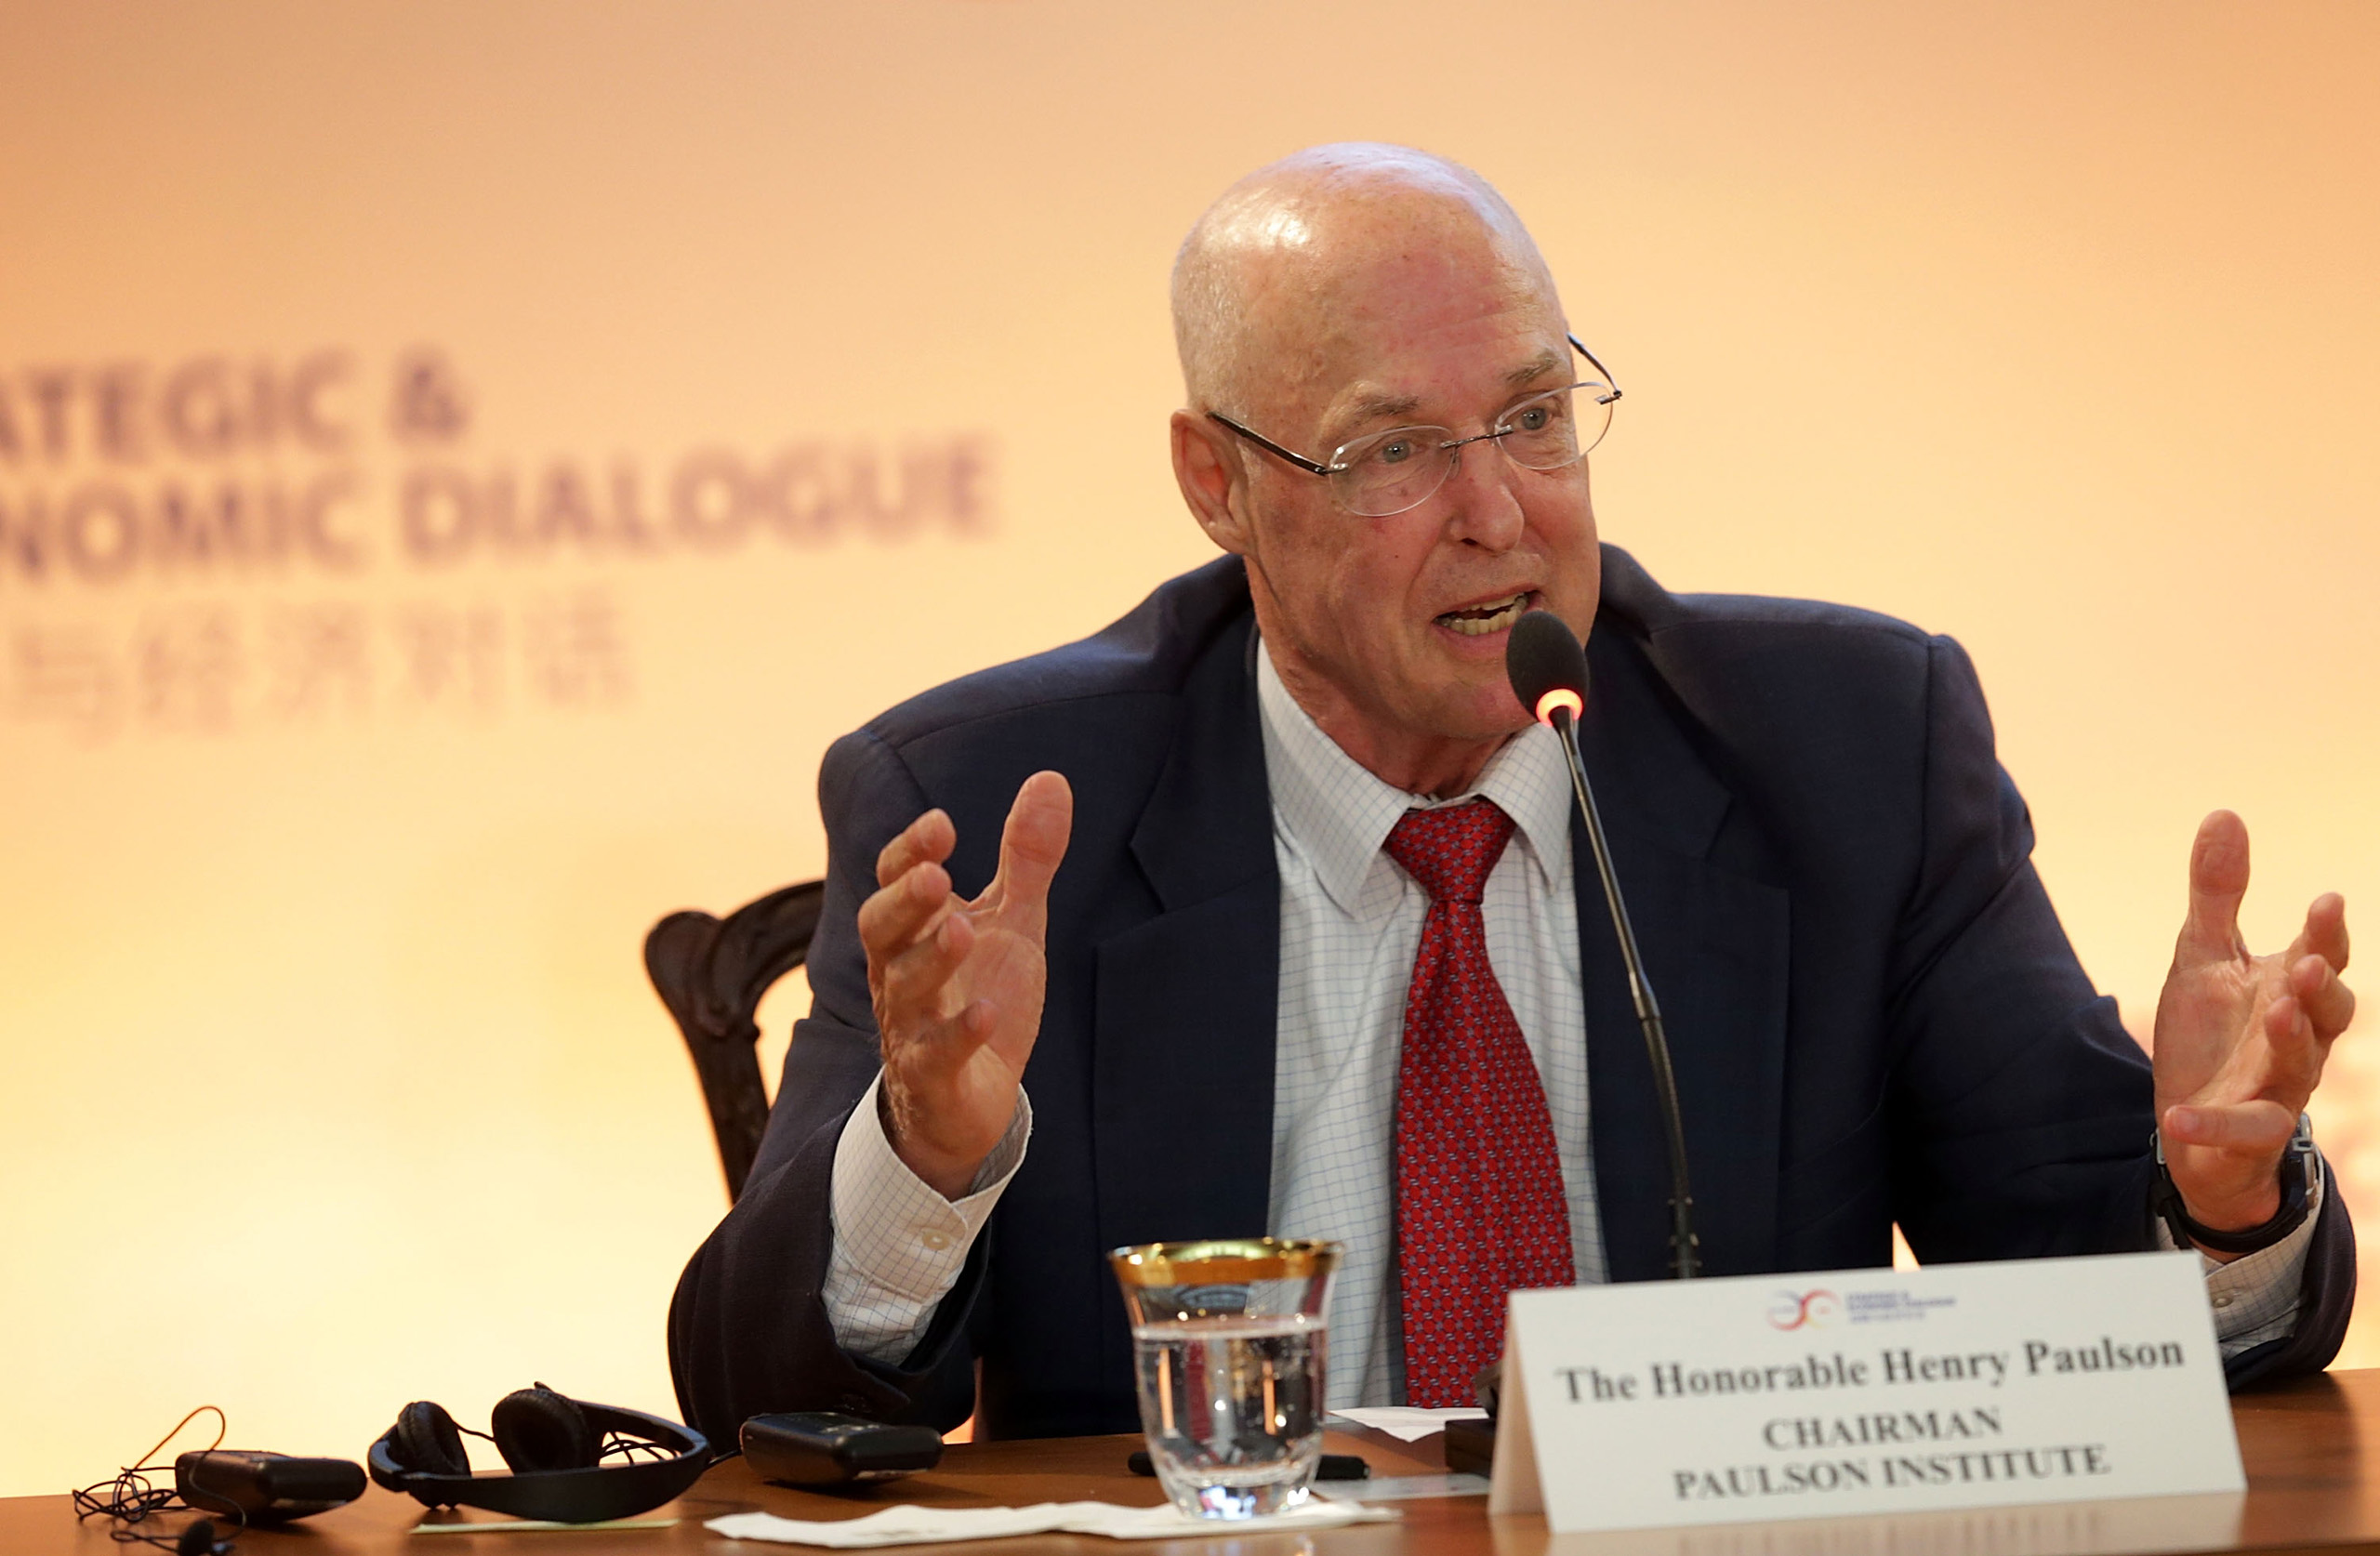 Former Secretary of the Treasury Henry Paulson speaks during a panel discussion on energy and environment cooperation during the Strategic and Economic Dialogue in Washington, D.C. on June 23, 2015. (Alex Wong—Getty Images)